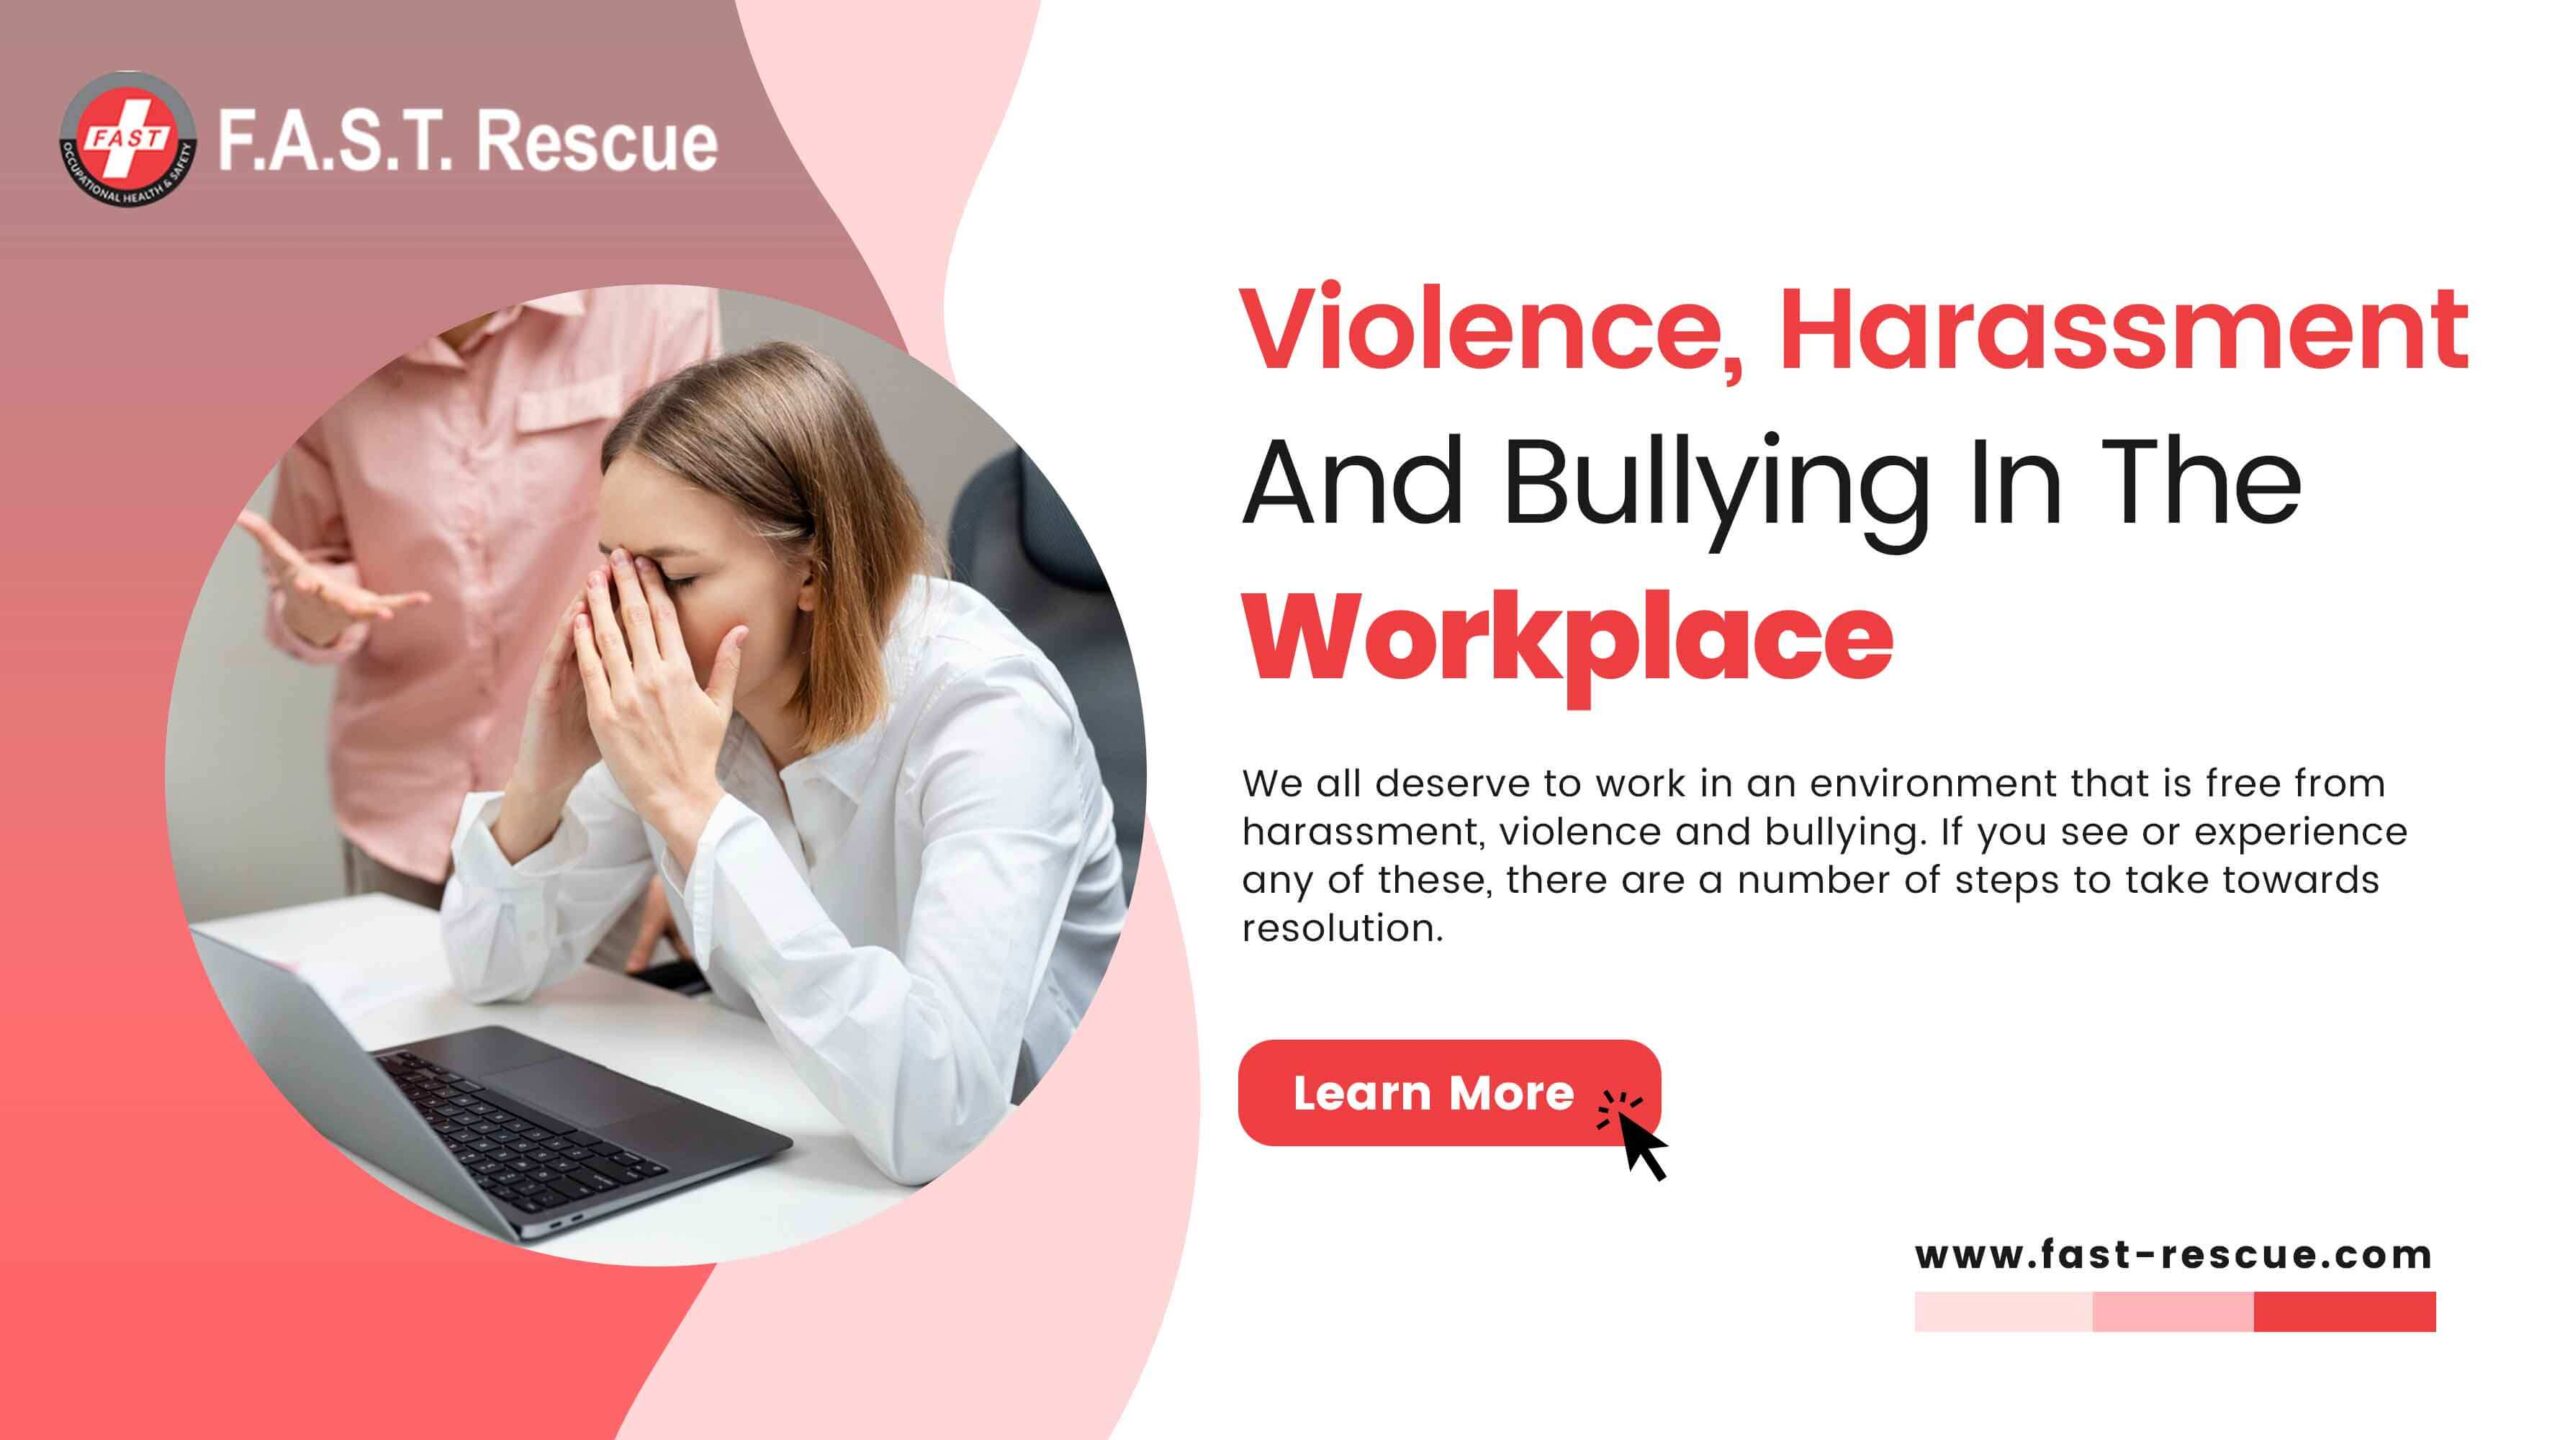 Violence, Harassment and Bullying in the Workplace